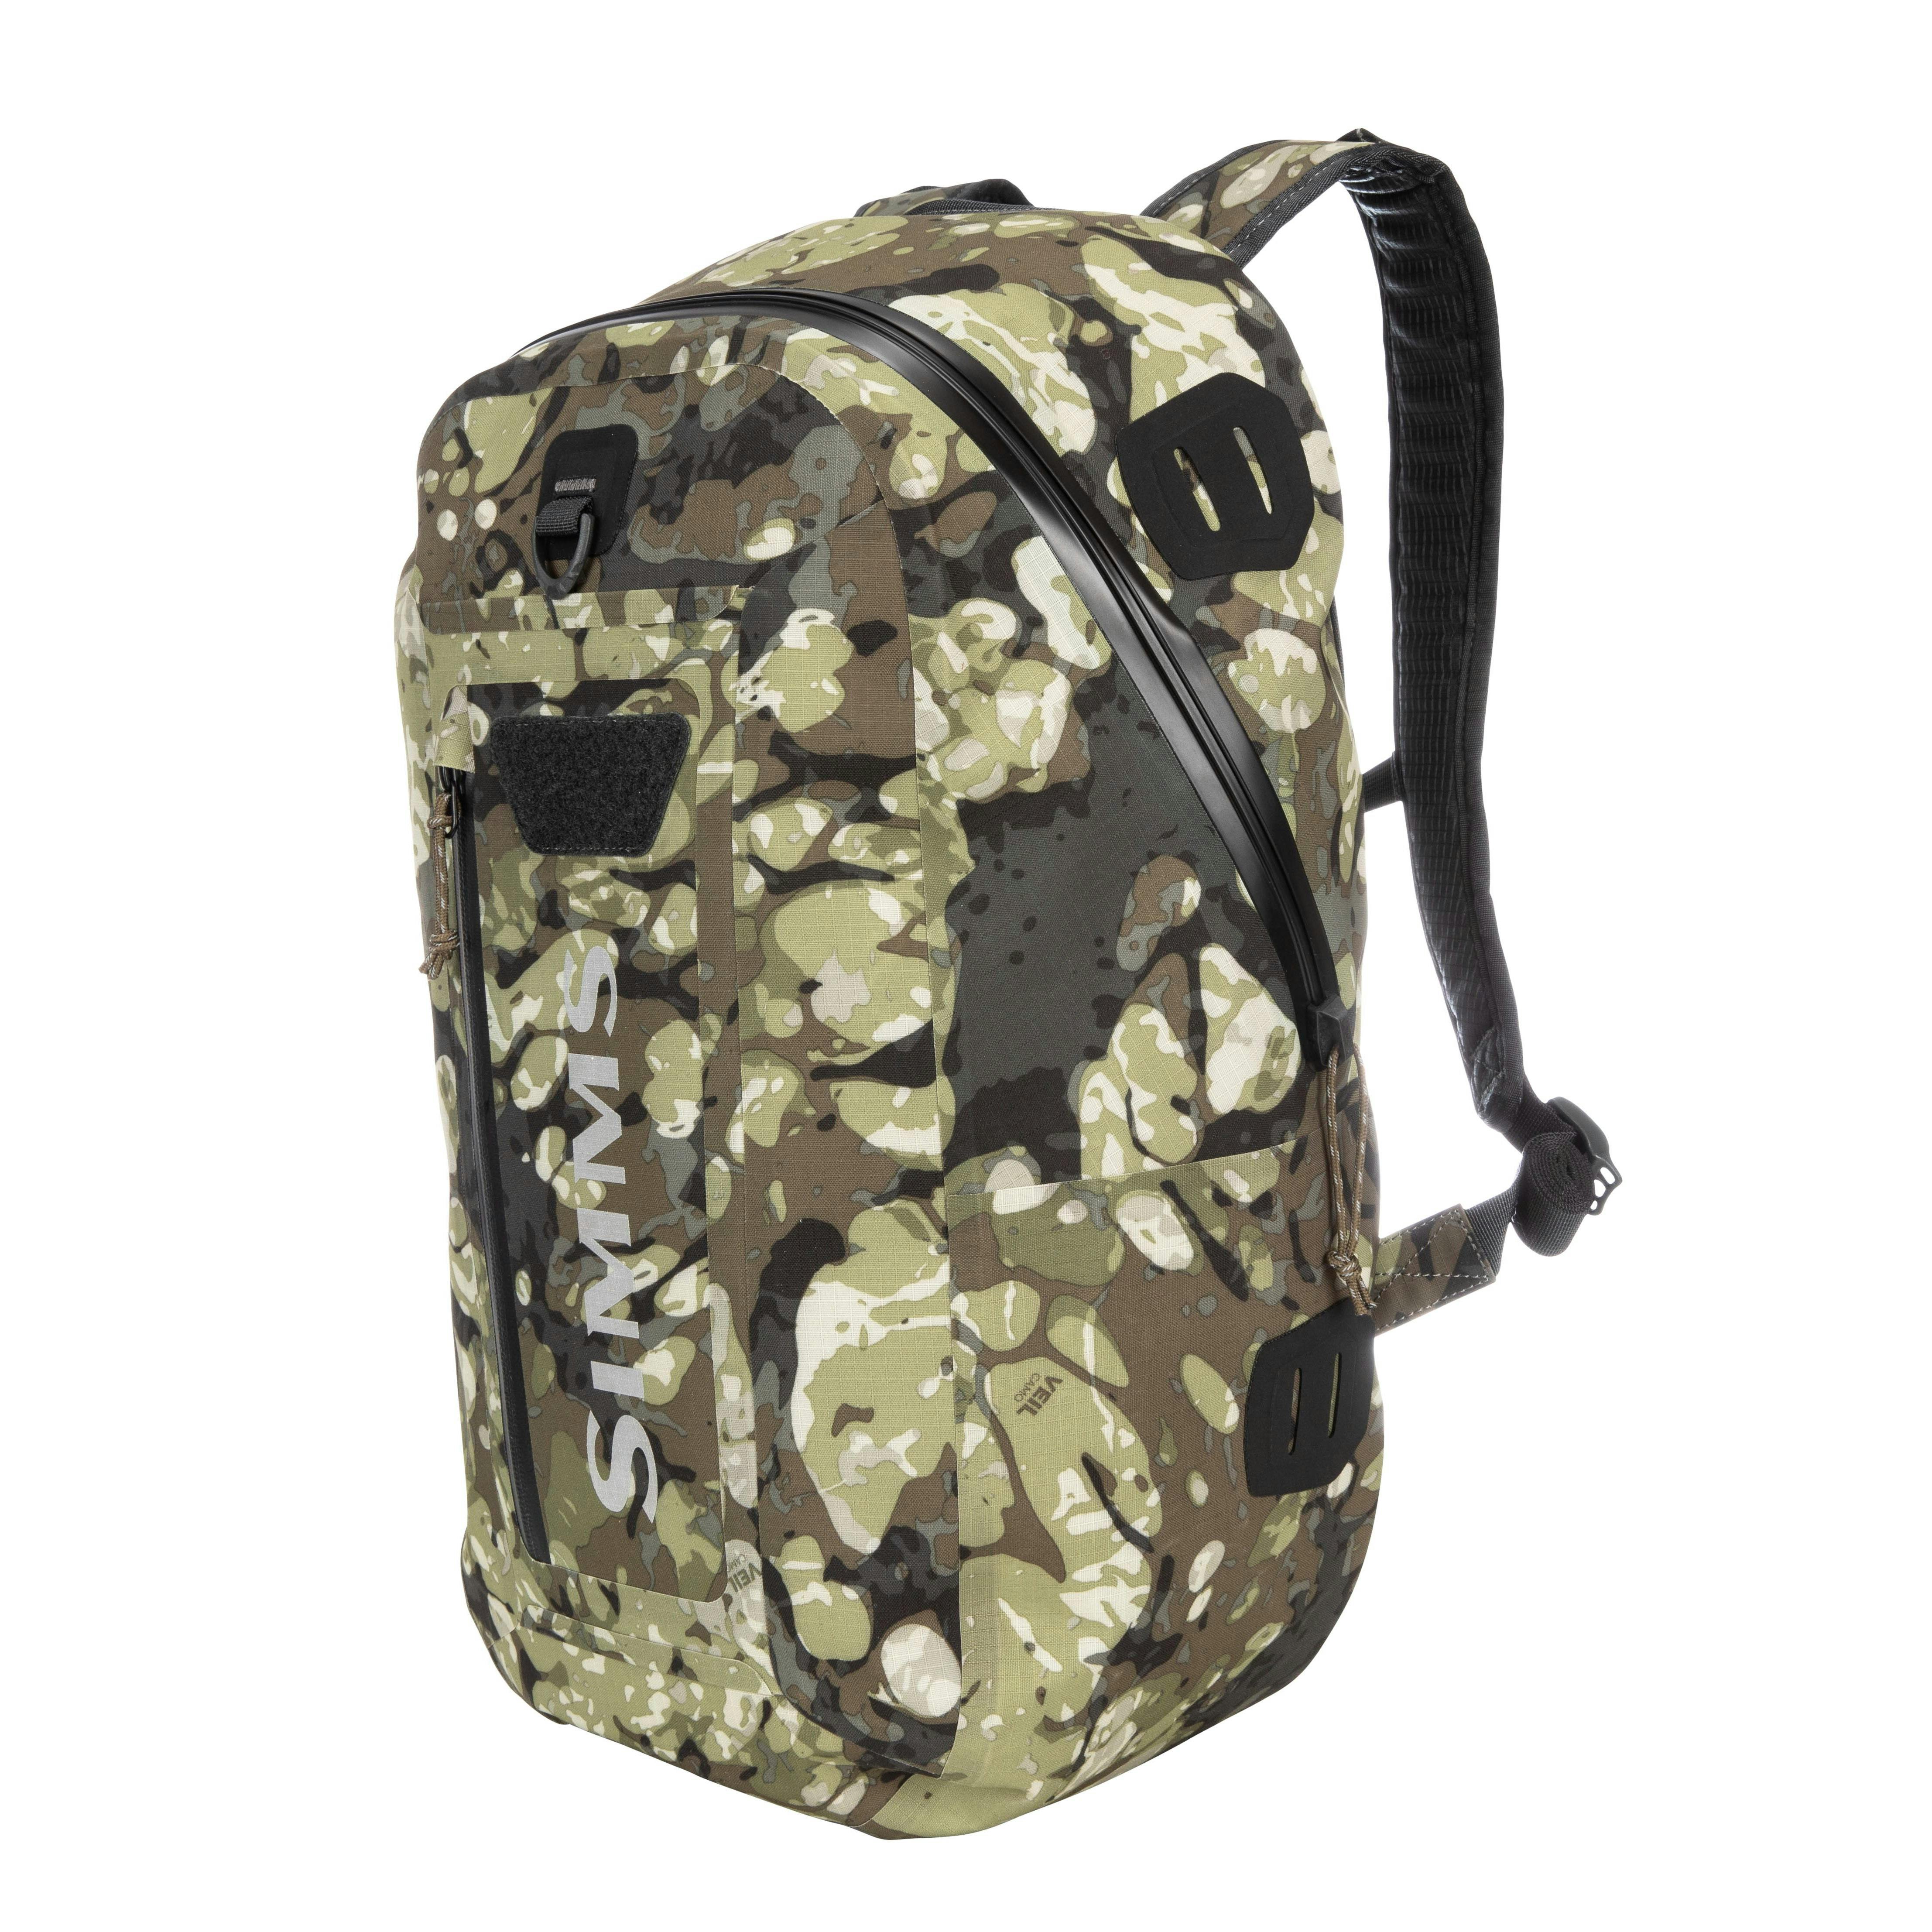 Simms Dry Creek Z Backpack - 35L - Riparian Camo, undefined